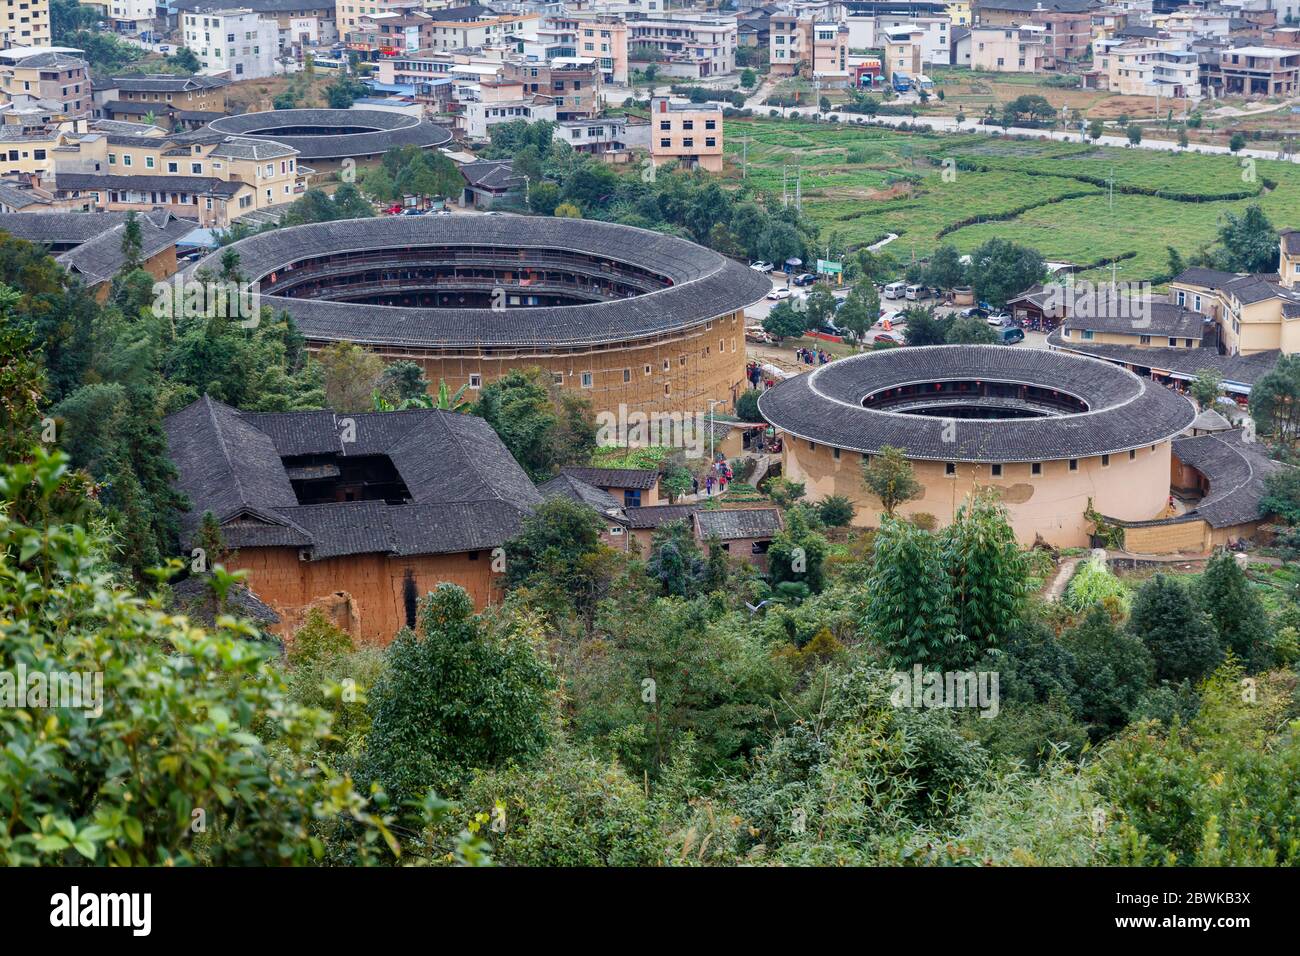 High angle view of three Fujian Tulou. The Chinese expression of the traditional houses is 福建土楼 - literally translated 'Fujian earthen buildings'. Stock Photo